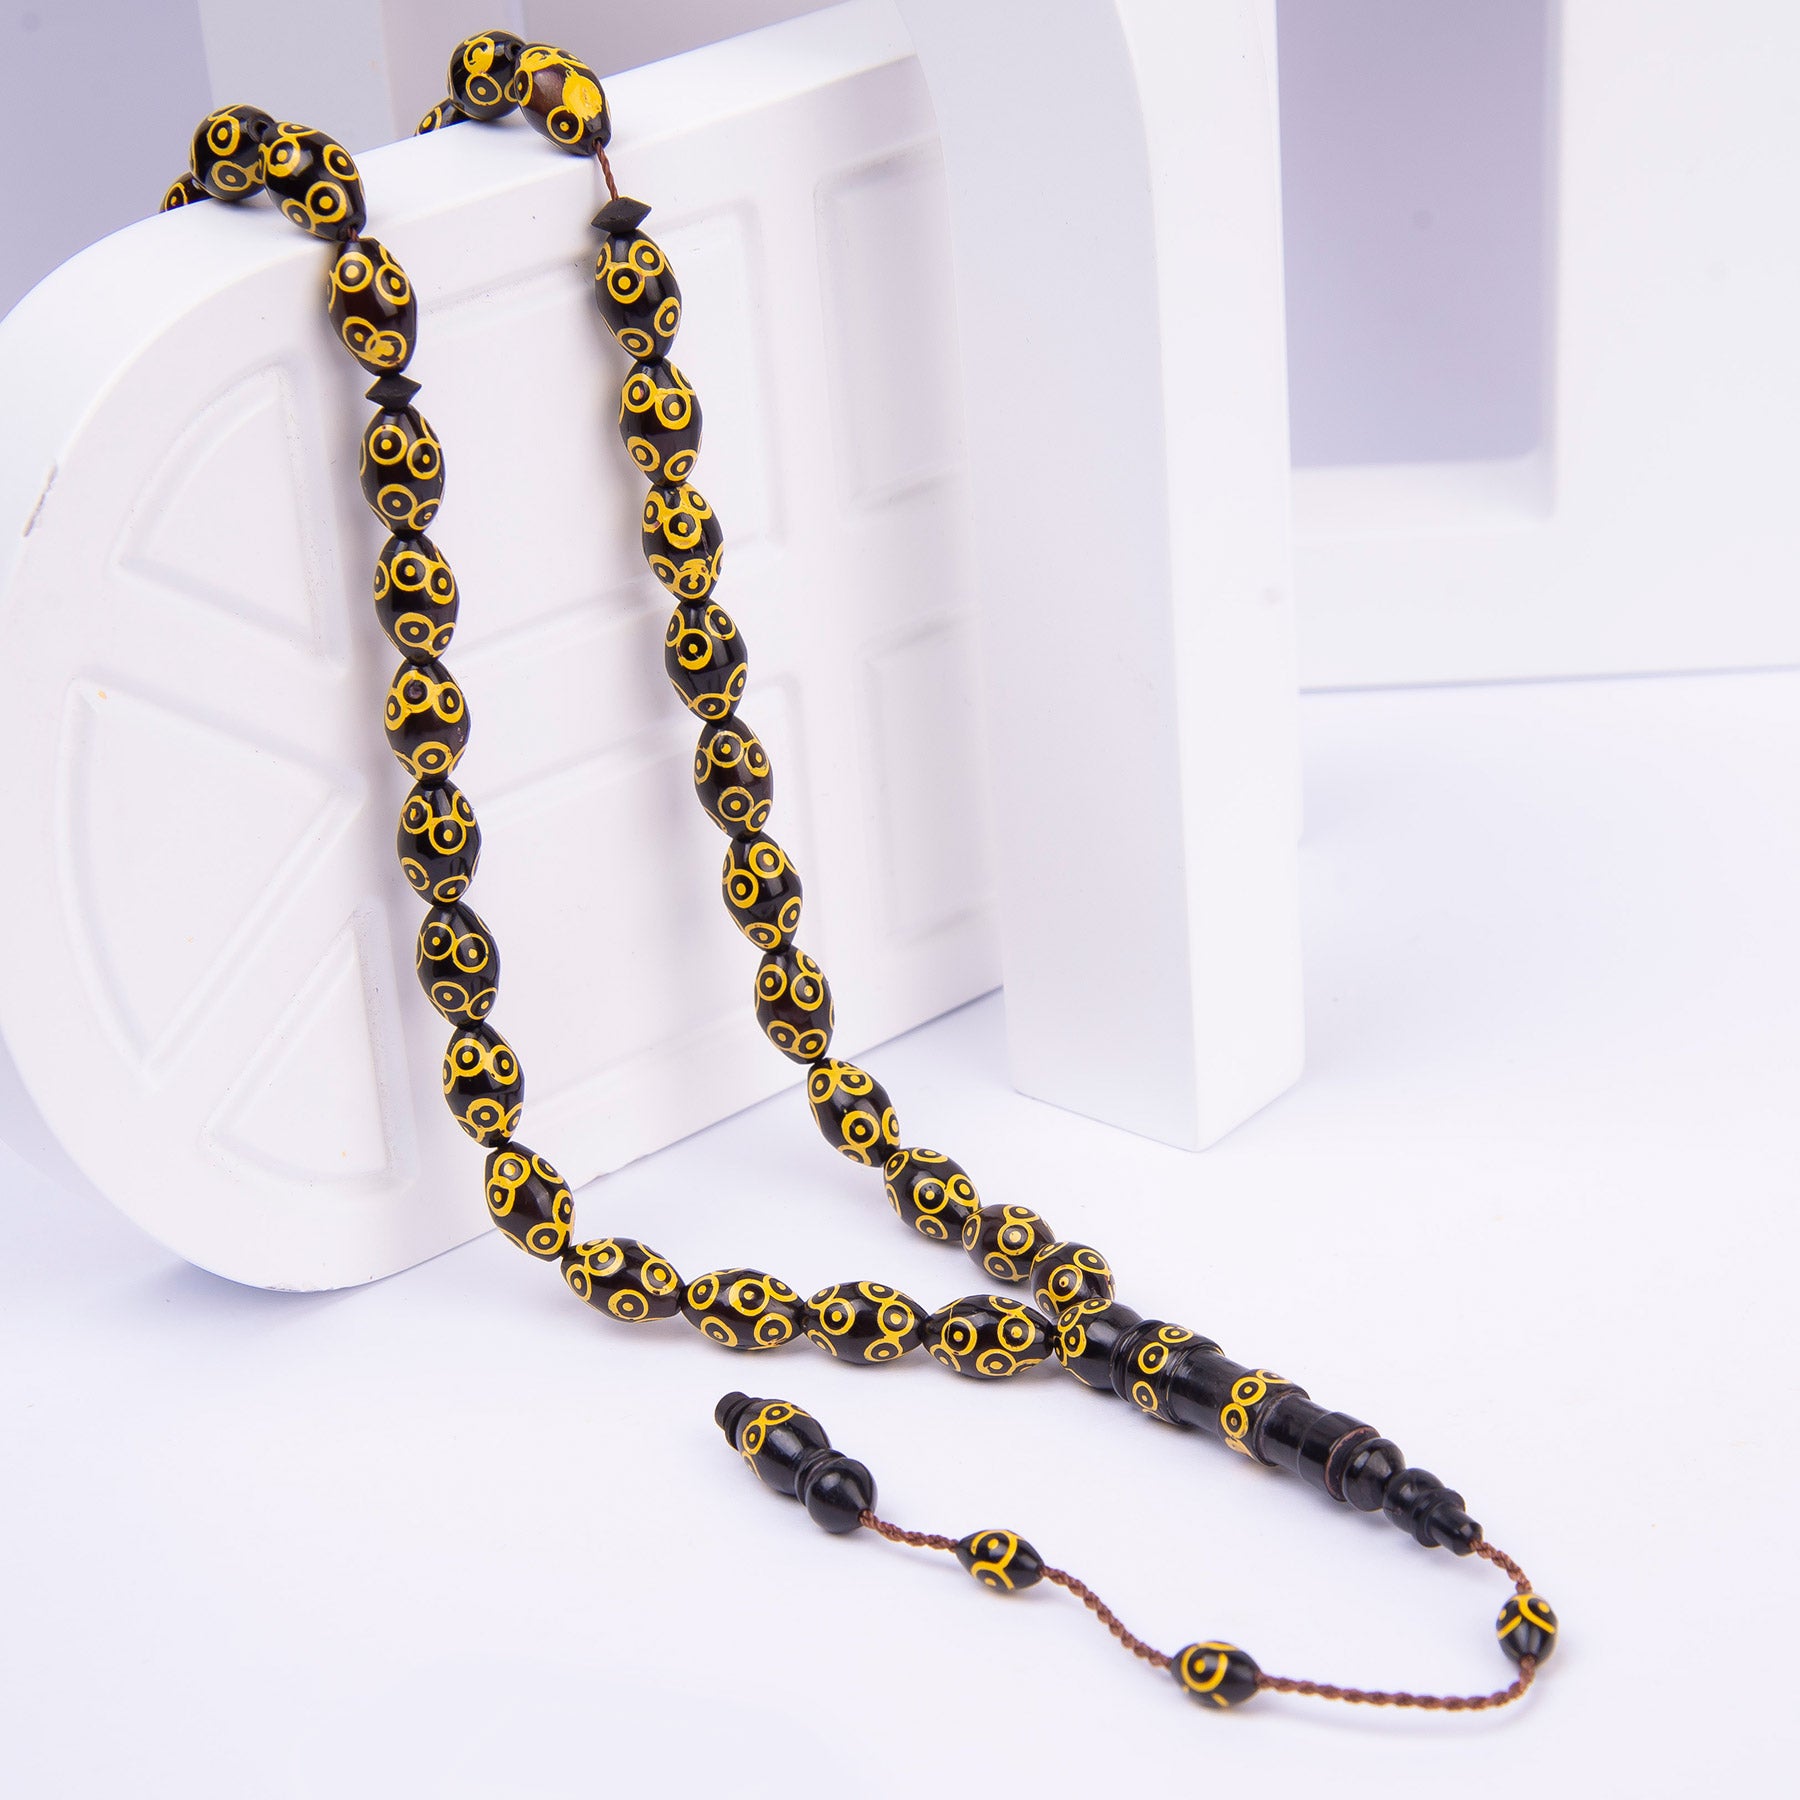 Systematic Solid Cut Embroidered Ebony Wood Prayer Beads 1